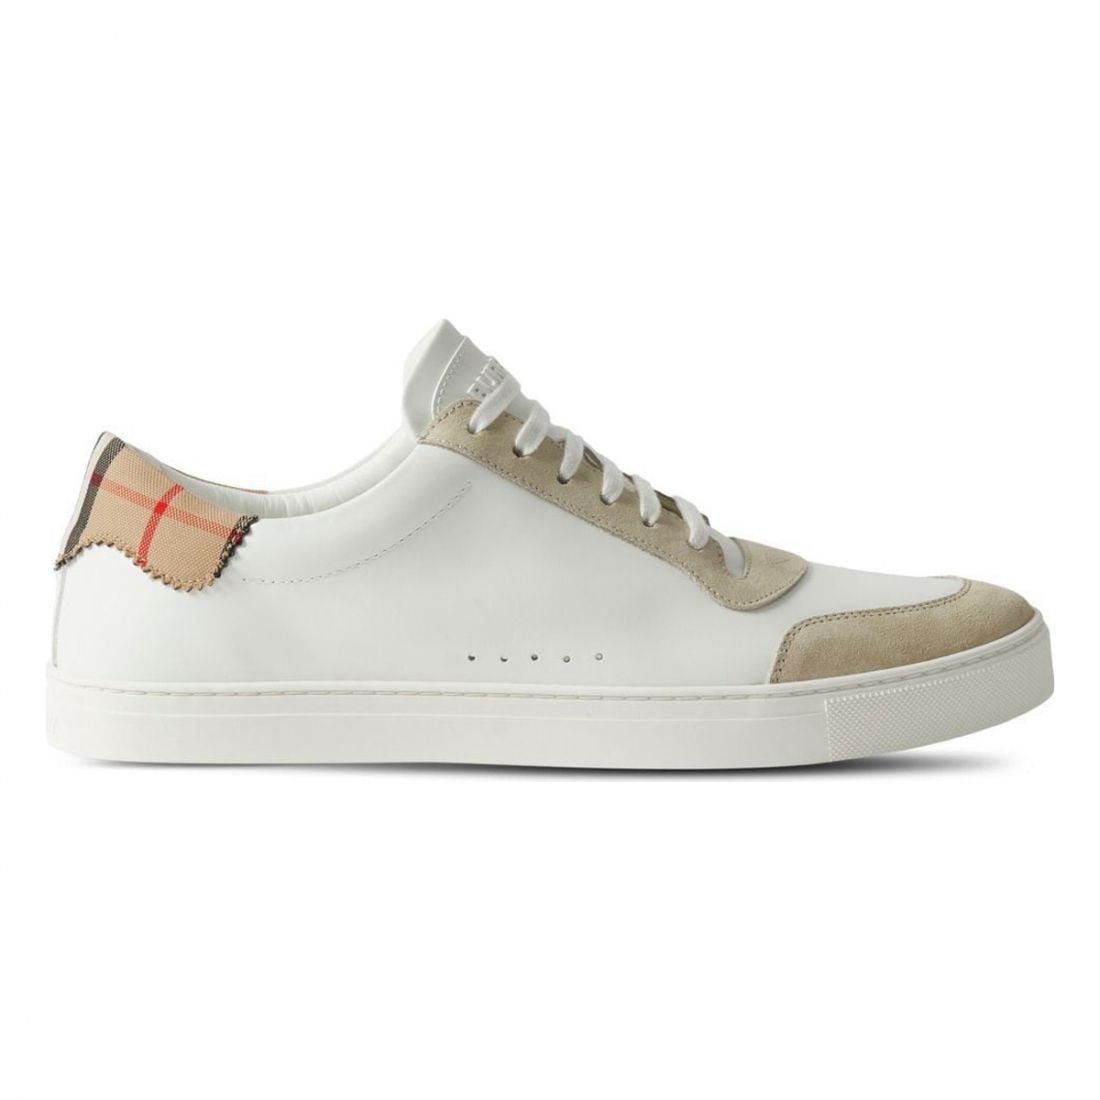 Burberry - Sneakers 'Robin' pour Hommes